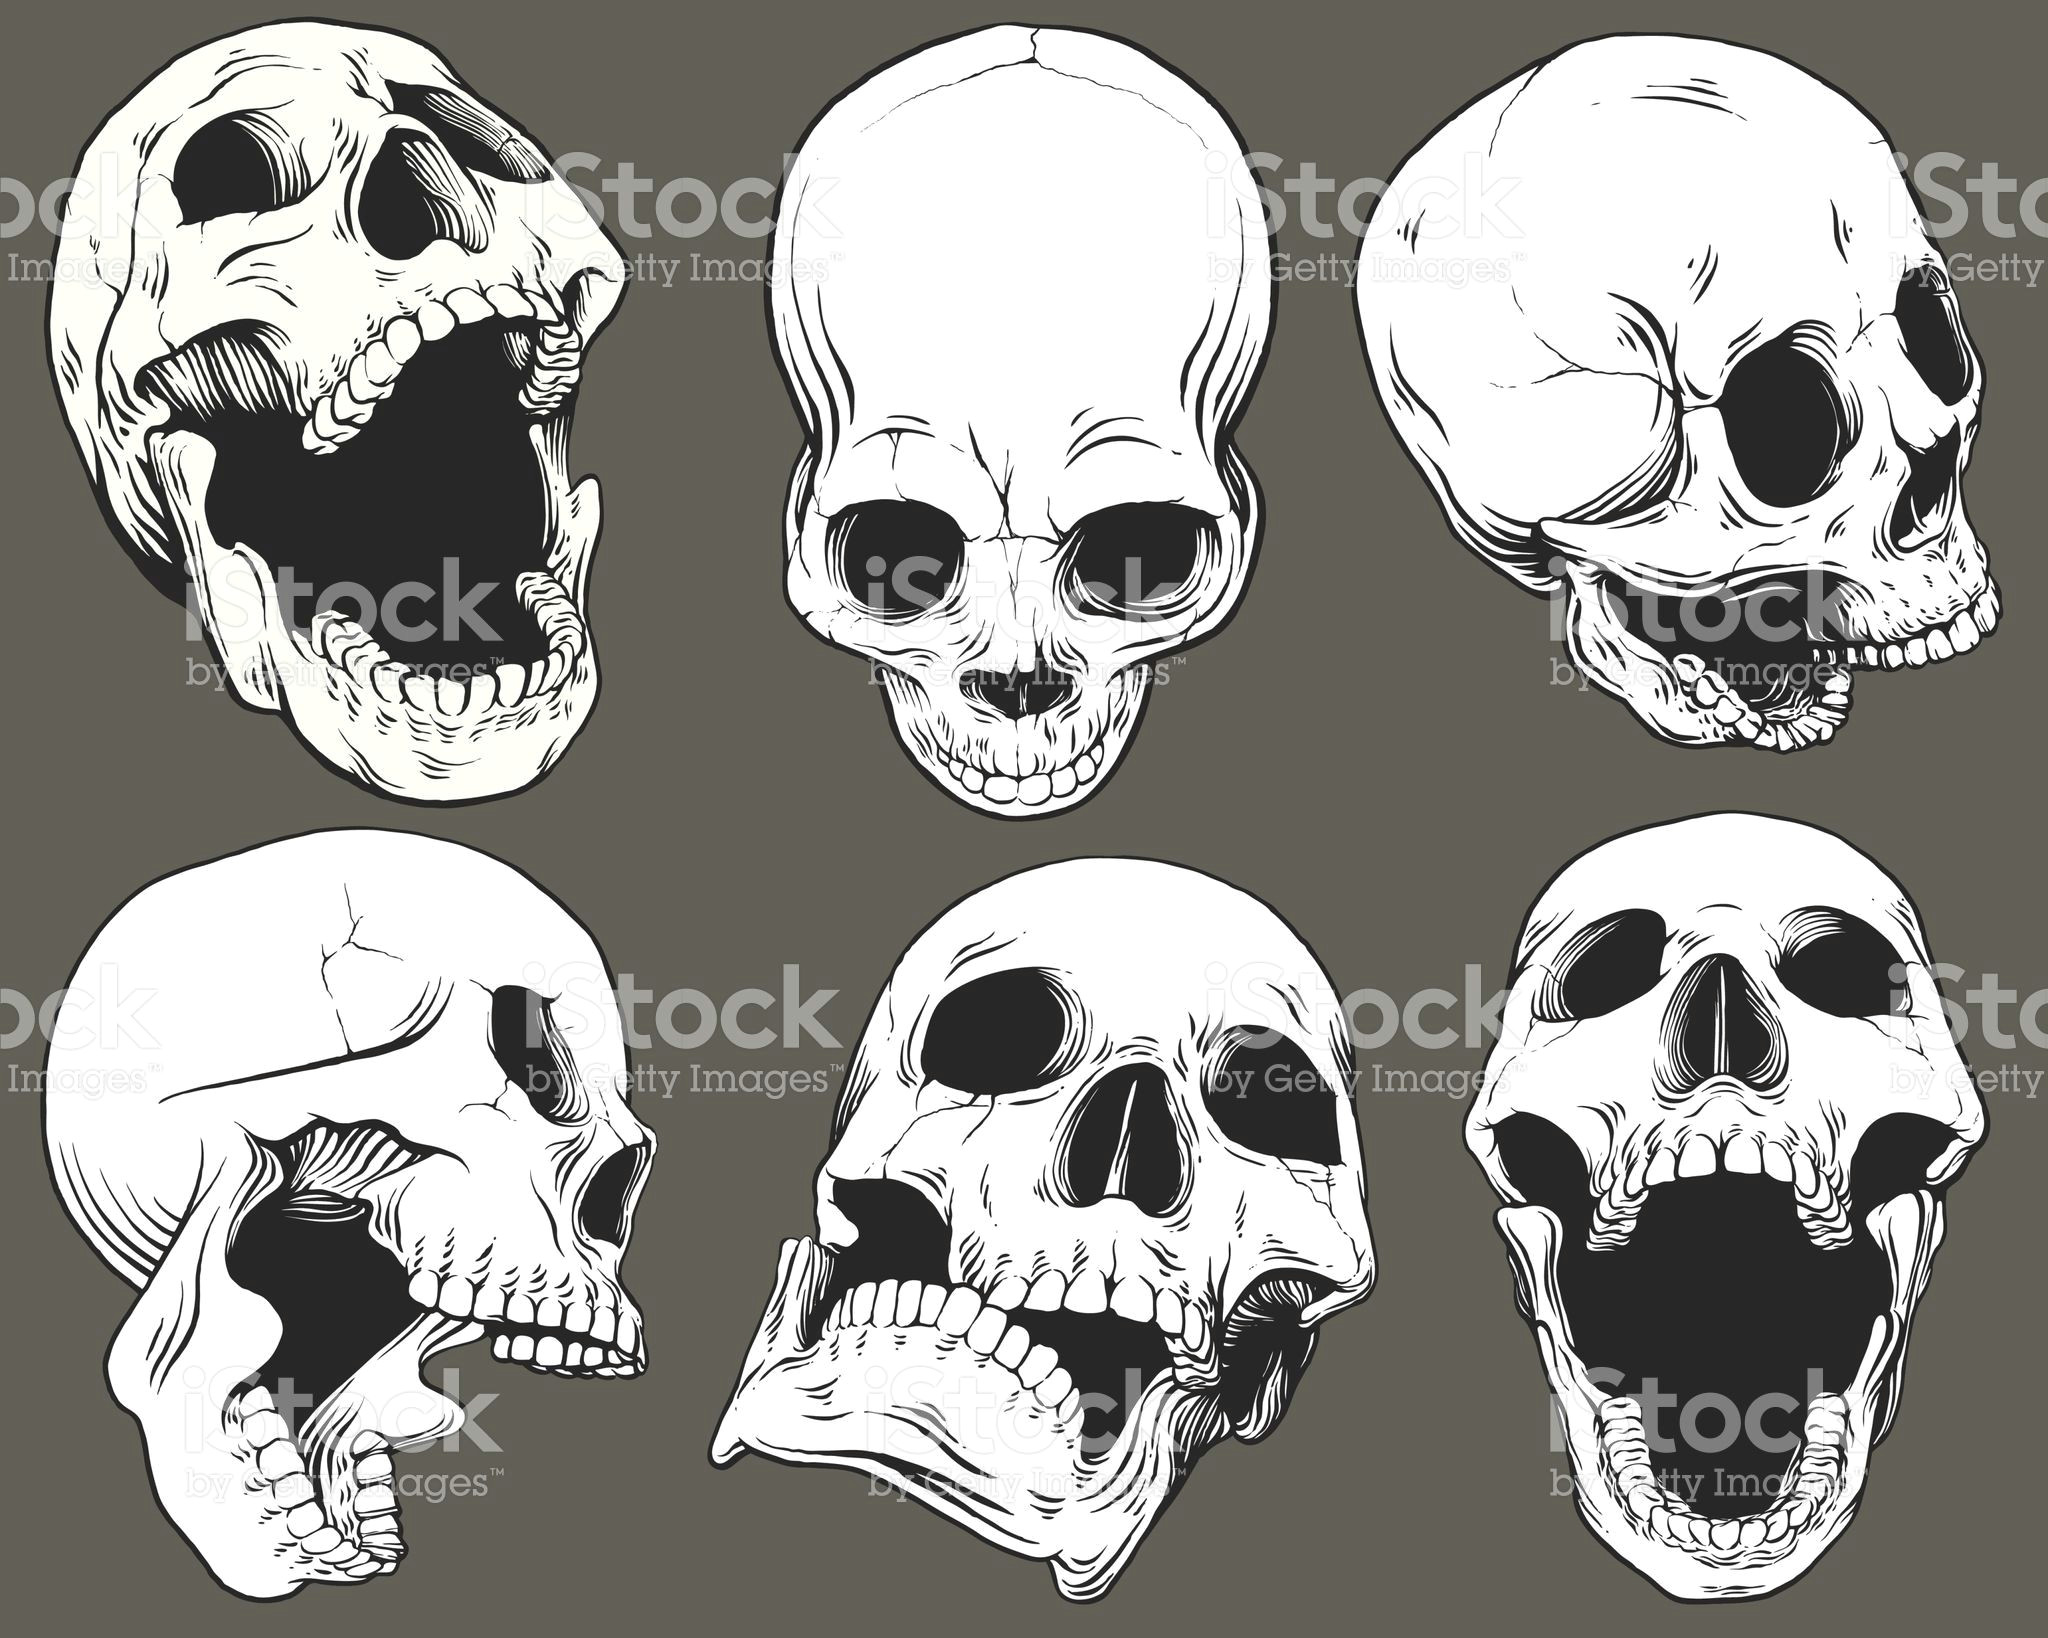 Drawing Anatomical Skull Collection Of Six Vector isolated Black and White Skulls Shown From